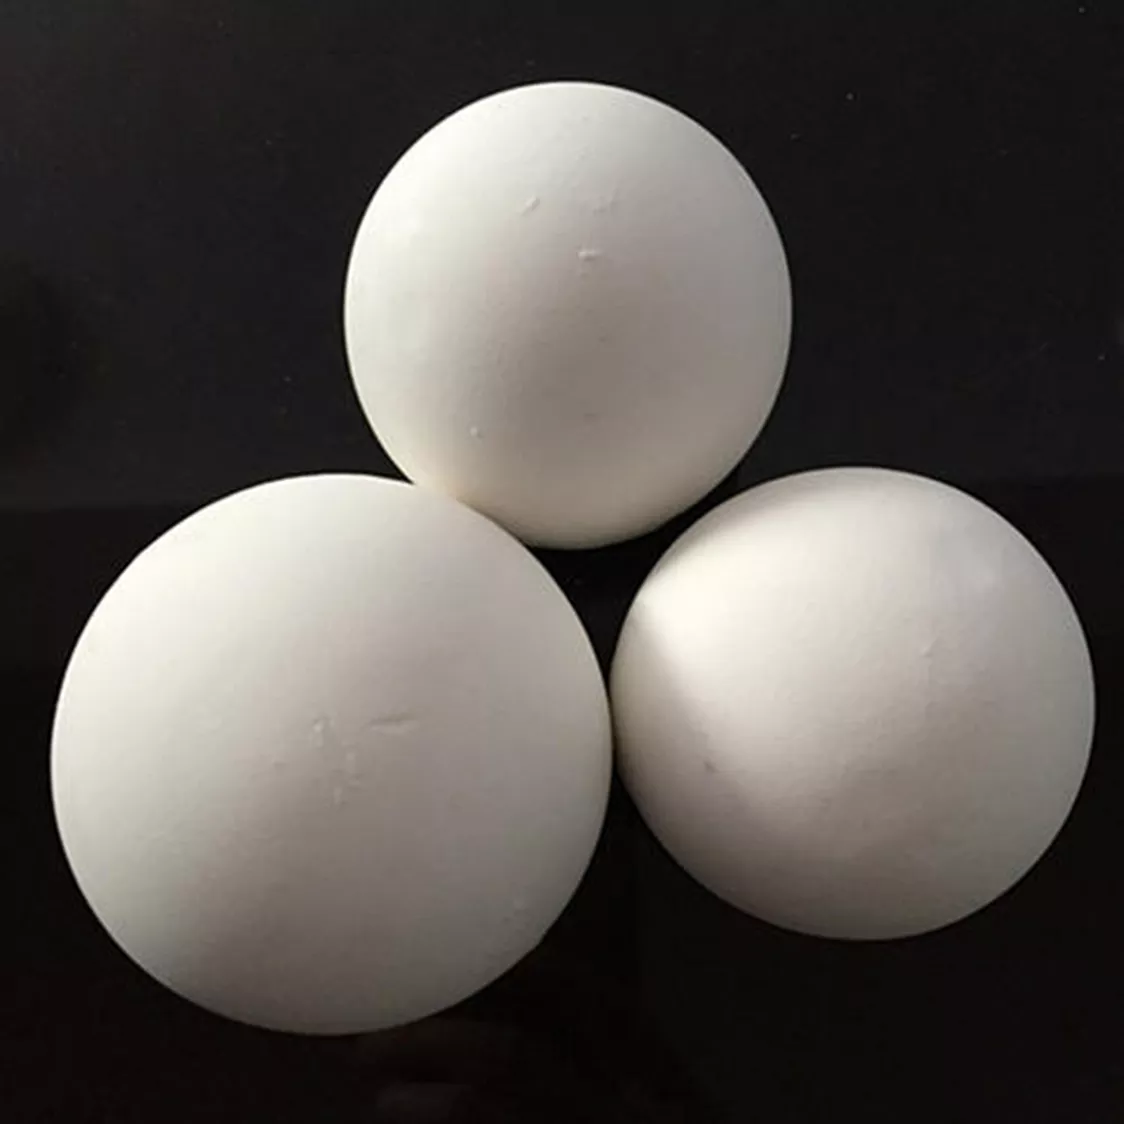 Can ceramic alumina balls be used with explosive materials?